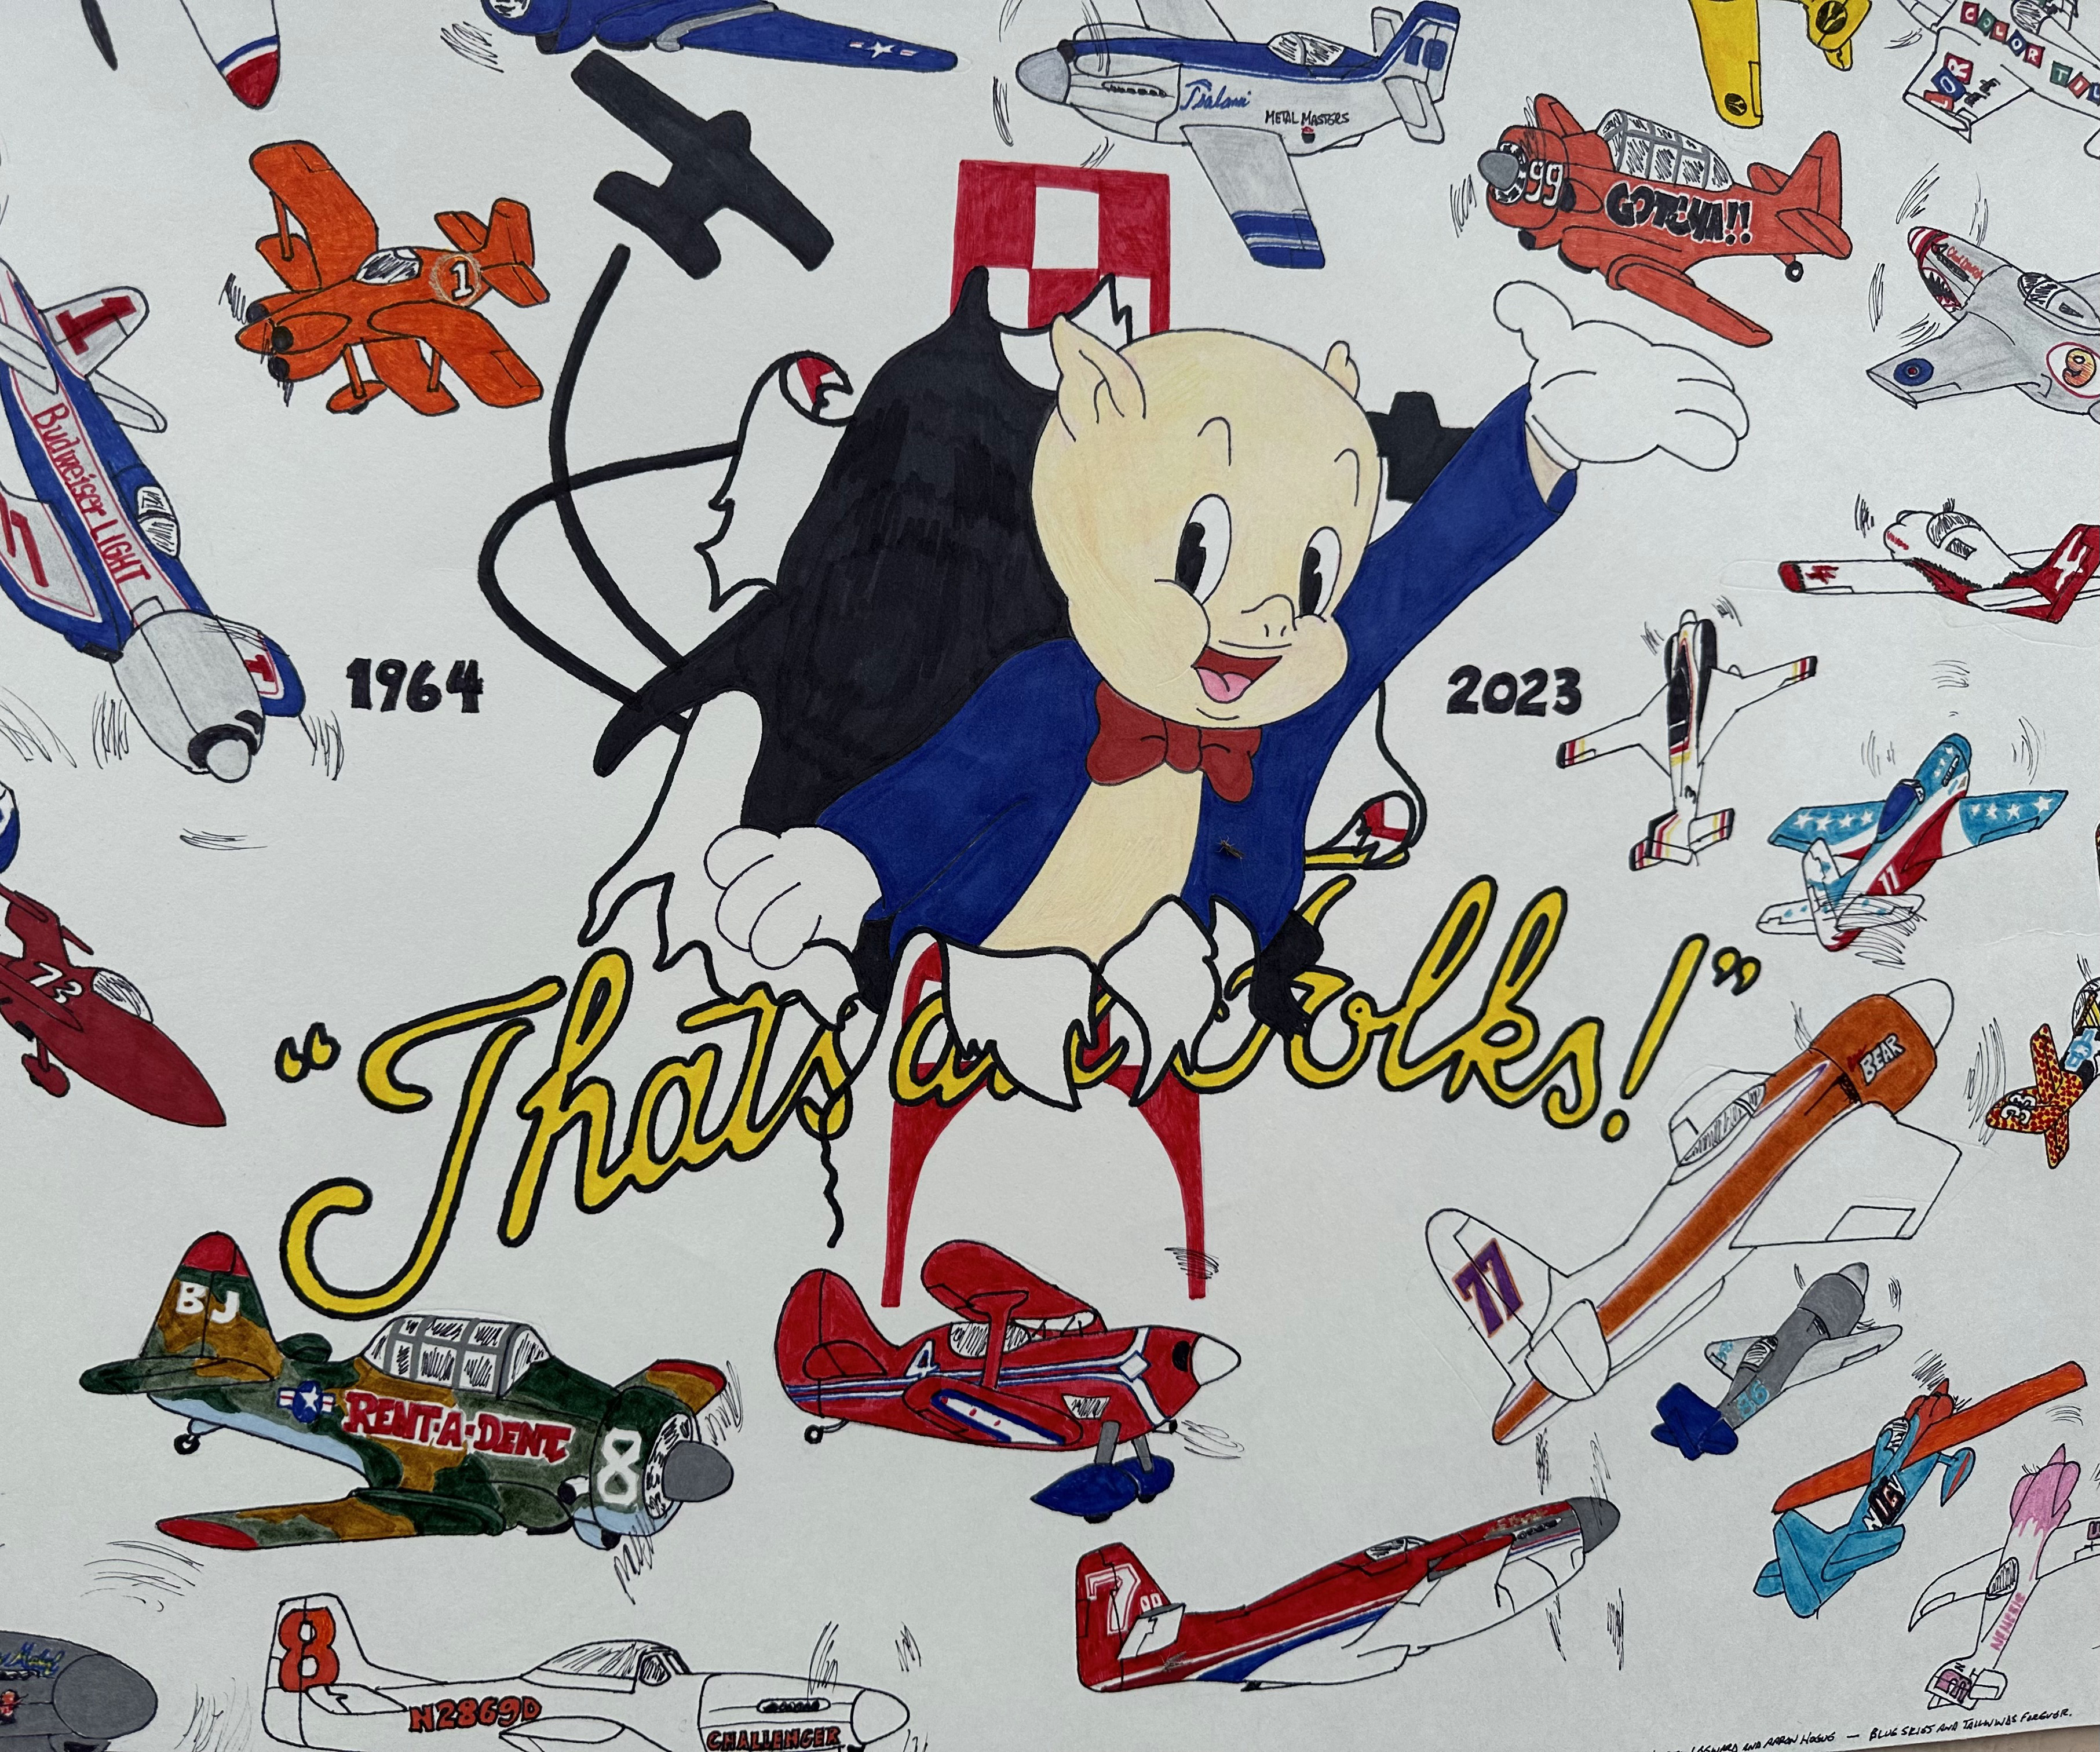 Farewell posters and messages were scattered across the Reno/Stead Airport, as fans and racers said goodbye to the Reno Air Races, which were held for the last time in Reno, Nevada, September 13 through 17. Photo by Cayla McLeod Hunt.